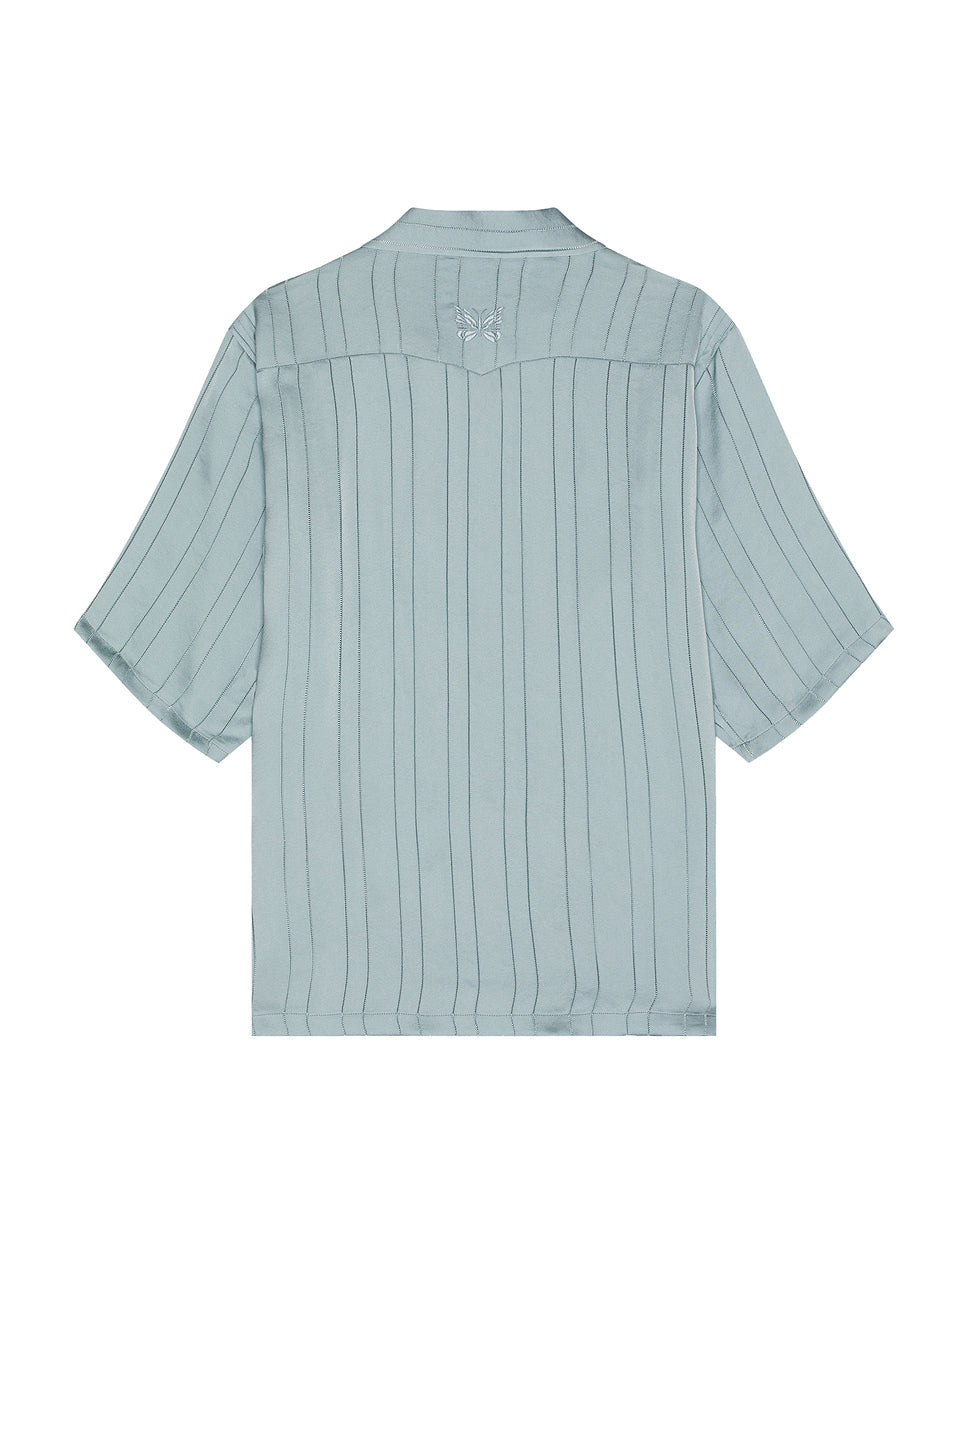 Short Sleeve Cowboy One-Up Shirt Georgette In Blue